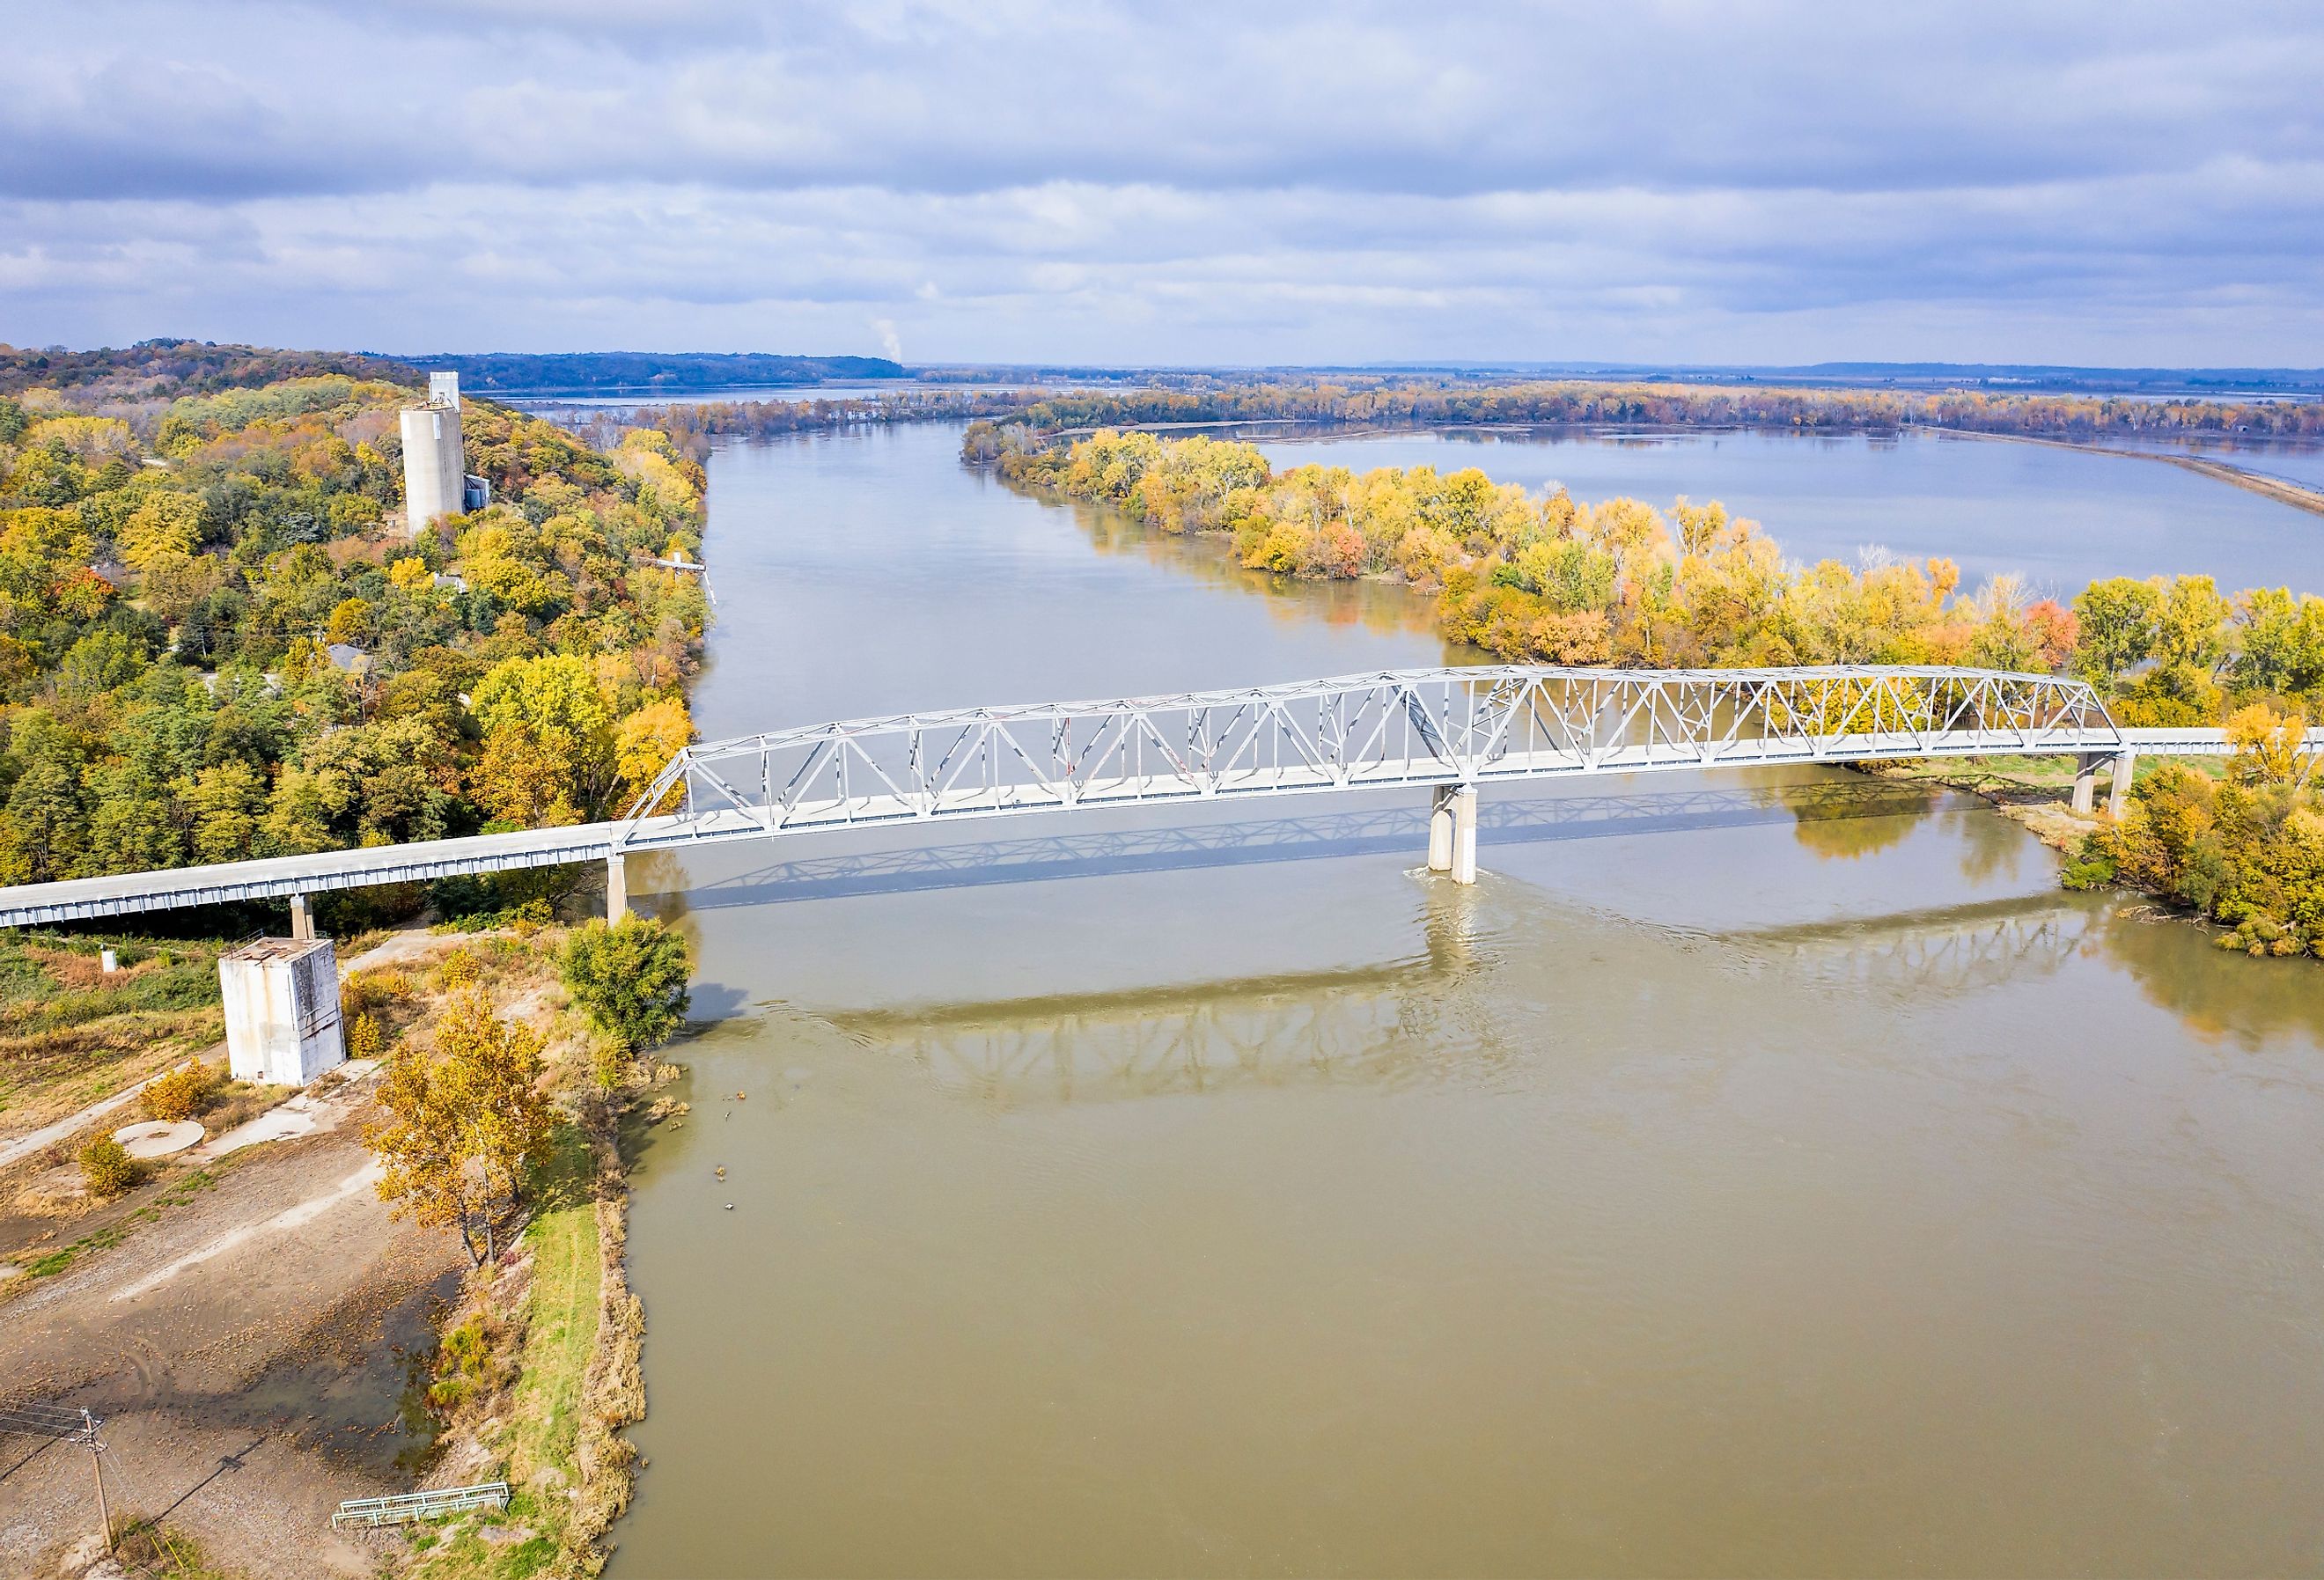 Aerial view in fall scenery with flooded river and Brownville Bridge over the Missouri River at Brownville, Nebraska.